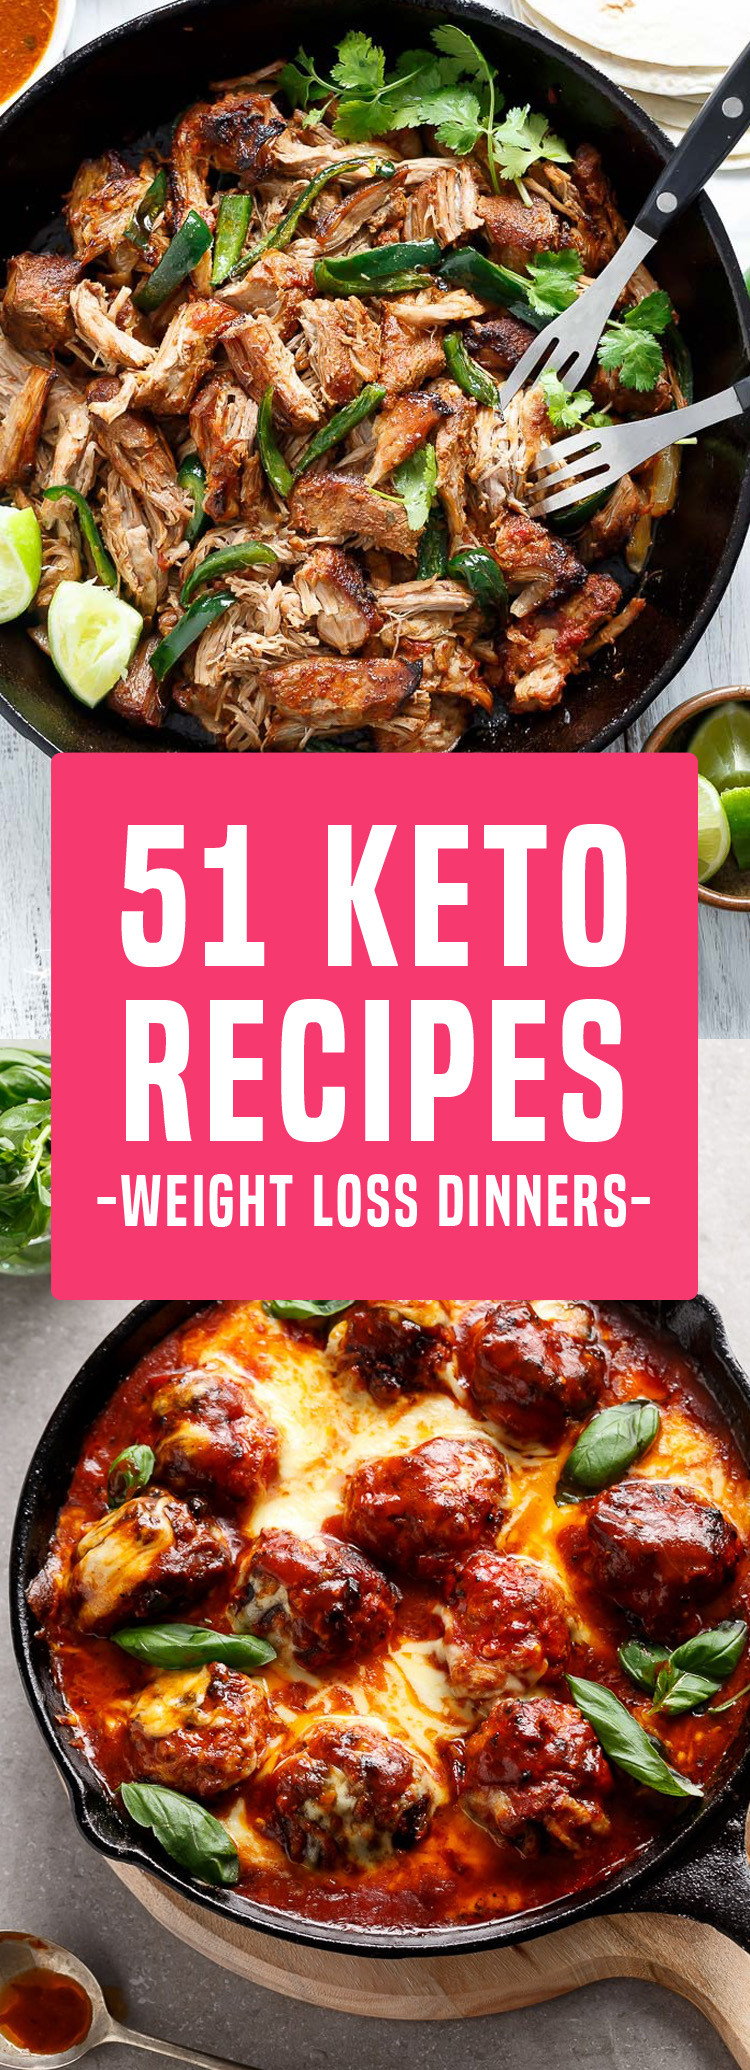 Healthy Keto Dinner Recipes For Weight Loss
 The Best 51 Delicious Keto Recipes That Make The Perfect